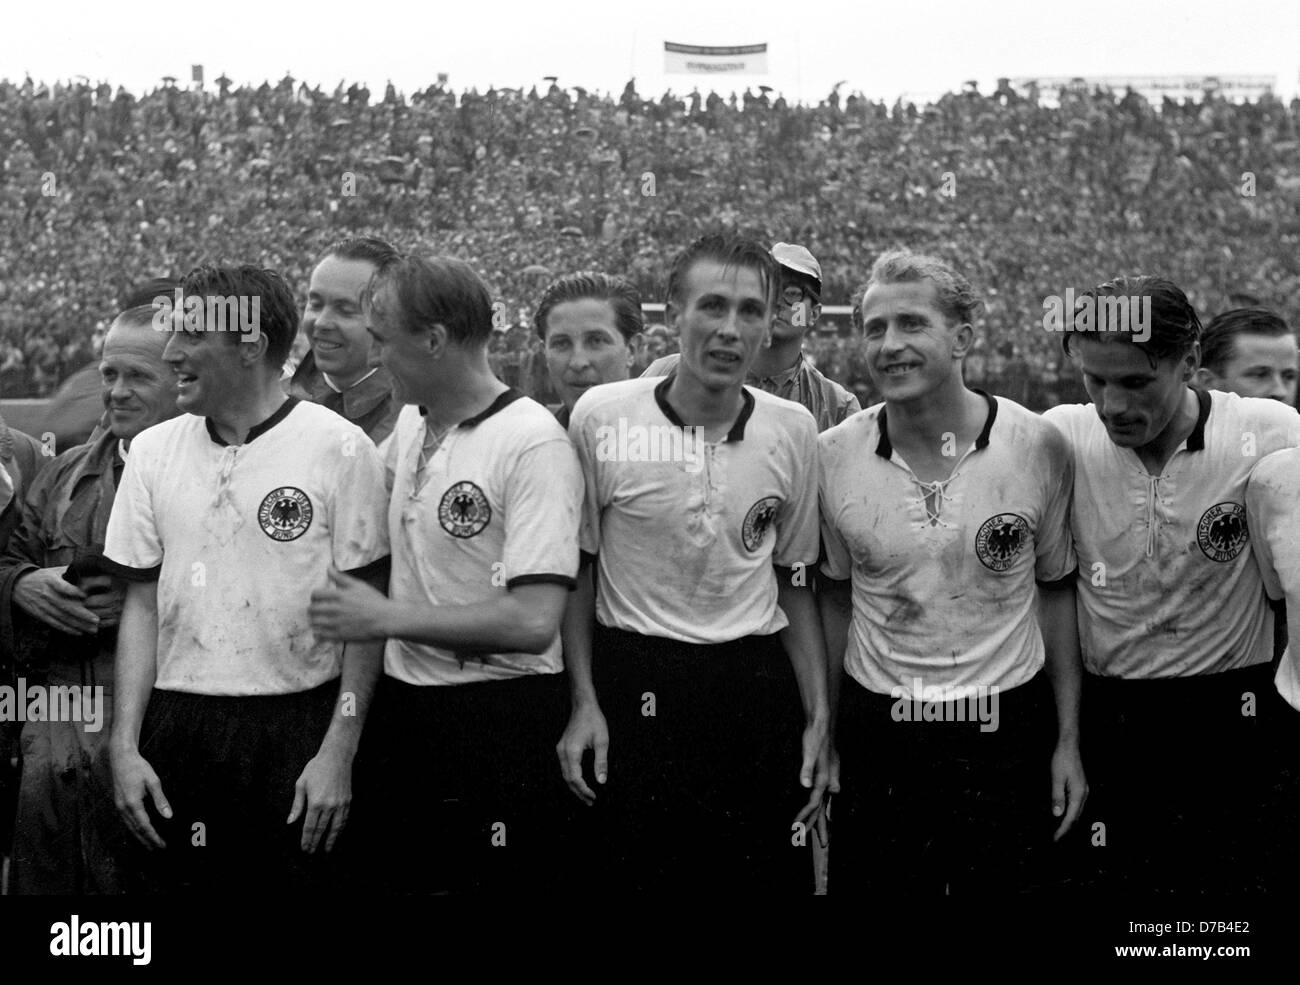 Germany wins the final match of the soccer world championship against Hungary on the 4th of July in 1954 in Bern. The picture shows (l-r) coach Sepp Herberger, captain Fritz Walter, physiotherapist Erich Deuser, Jupp Posipal, team medicine Dr. Franz Loogen, Horst Eckel, Werner Liebrich and Ottmar Walter. Stock Photo